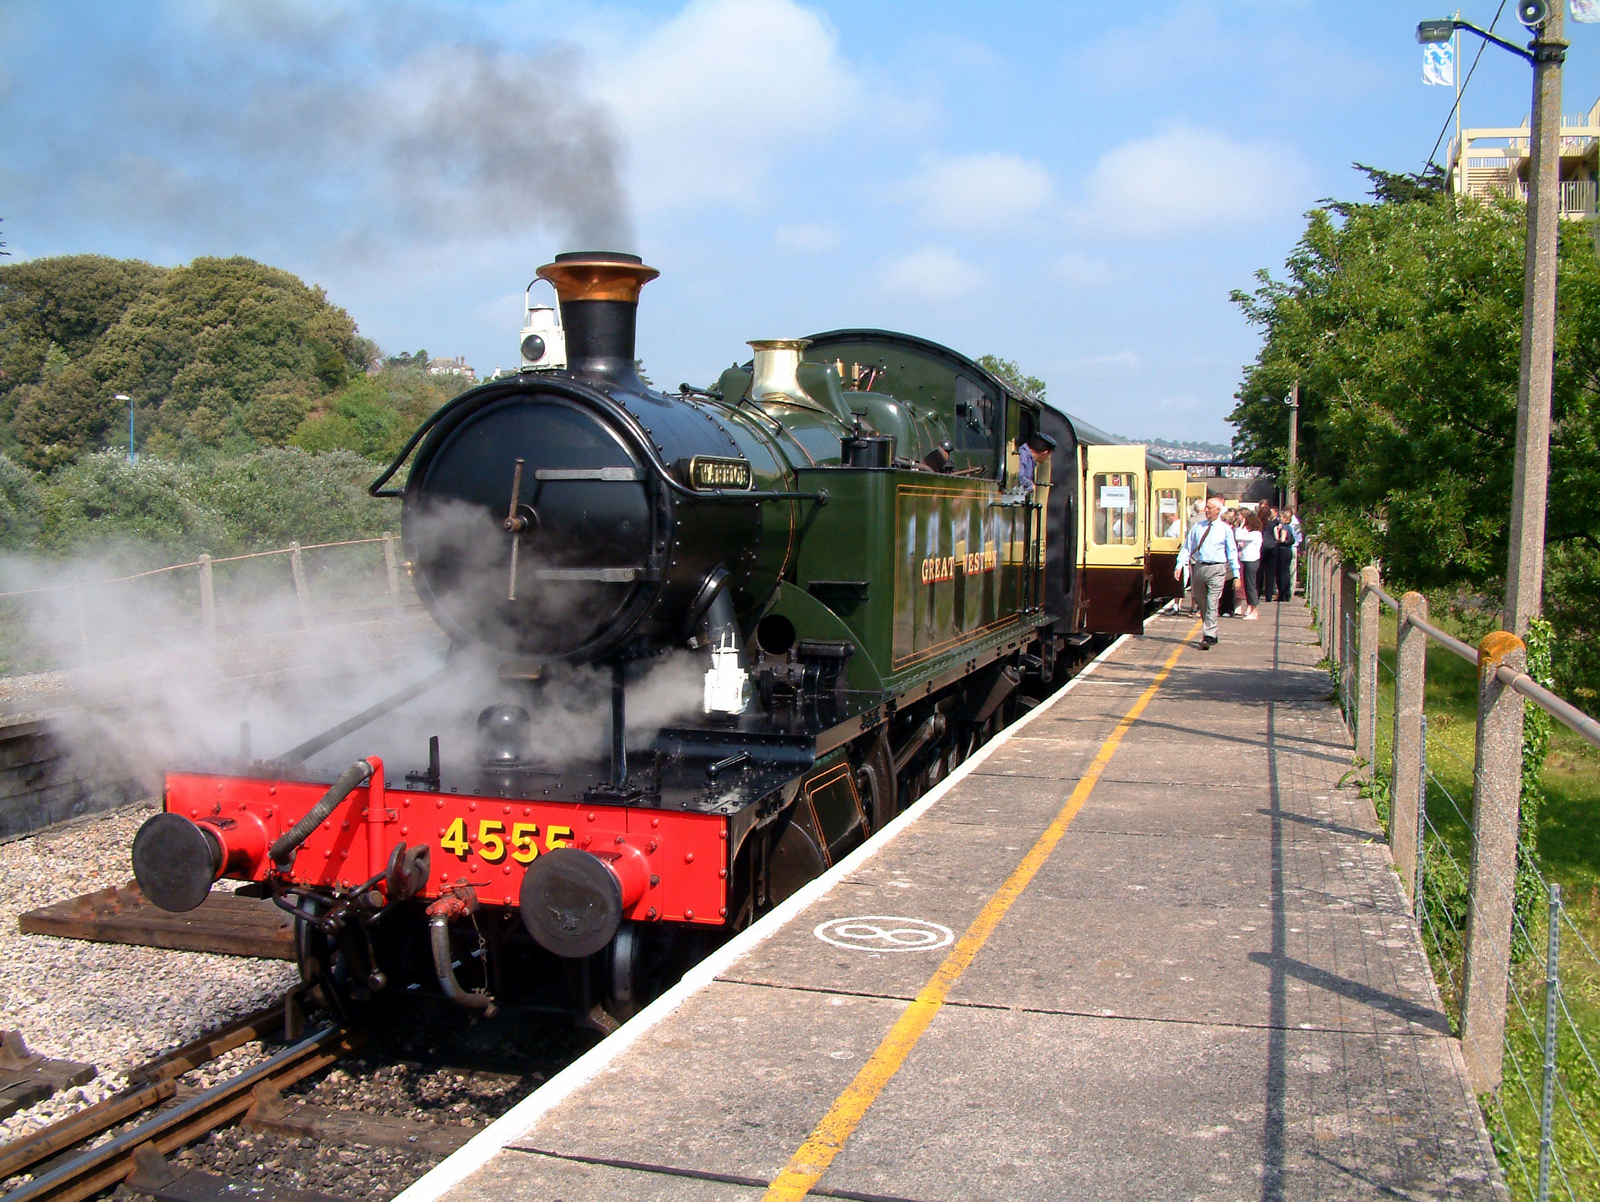 The Dartmouth Steam Railway linking The English Riviera with Dartmouth in south Devon